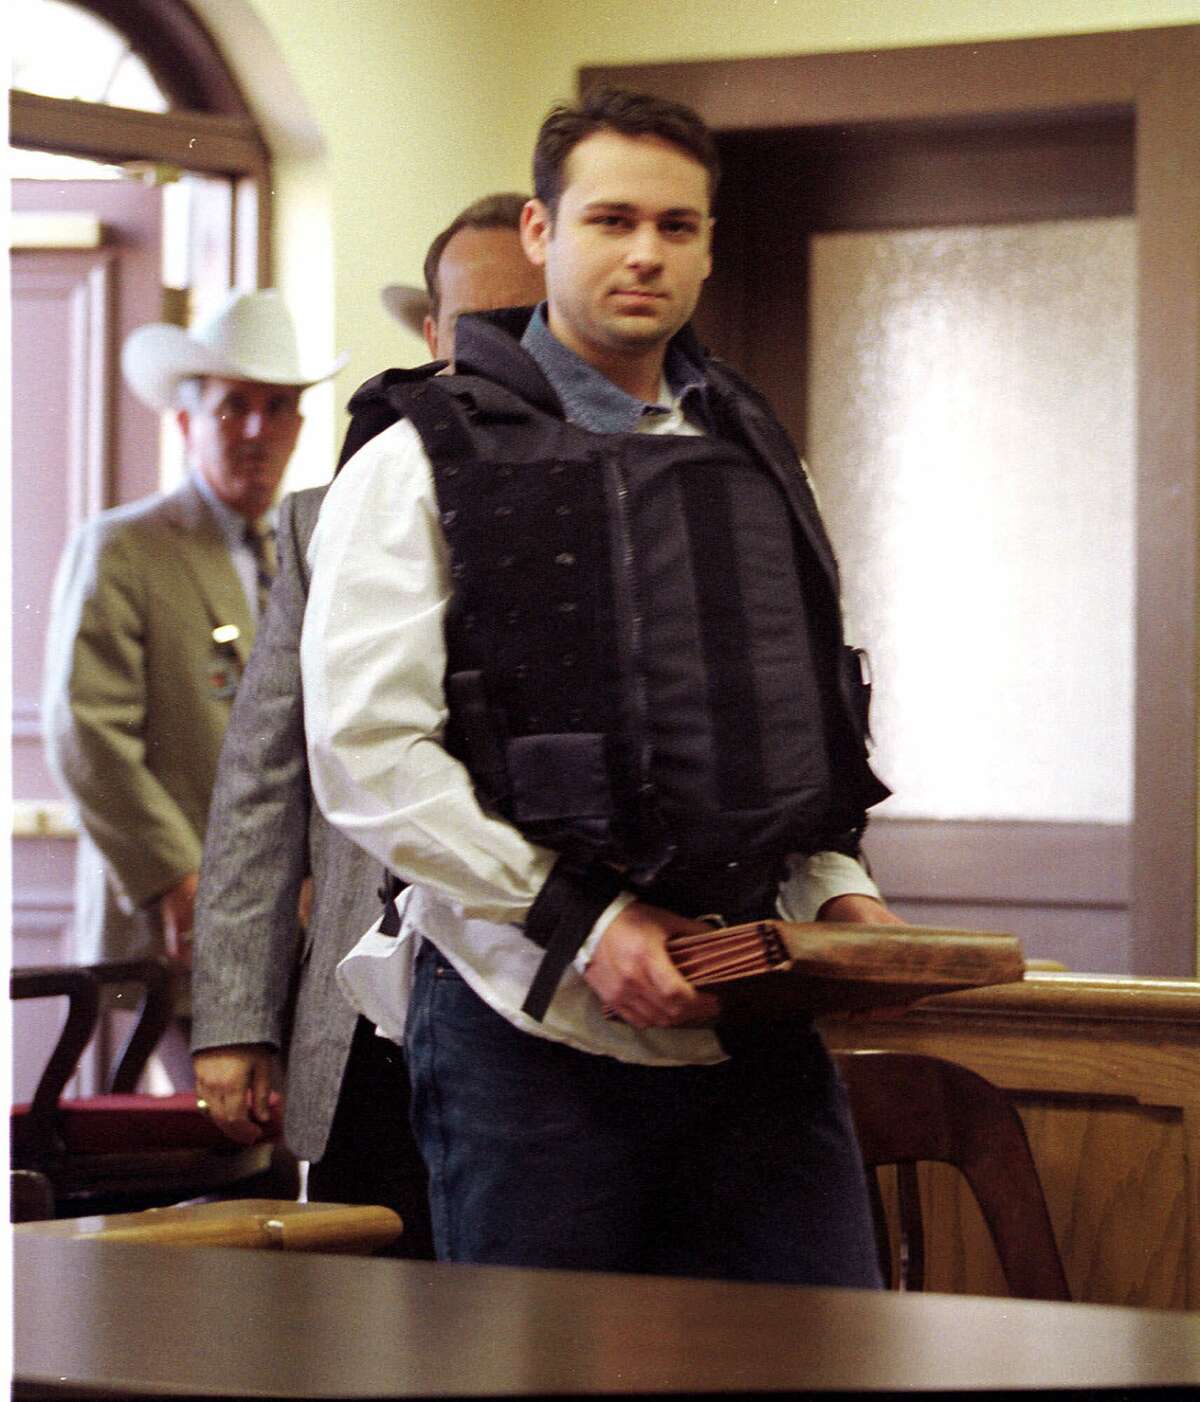 Convicted killer John William King is escorted into the Jasper County Courthouse for the punishment phase of his trial Wednesday, Feb. 24, 1999, in Jasper, Texas. King was convicted of capital murder in the dragging death of James Byrd Jr. (AP Photo/Adrees Latif, POOL)